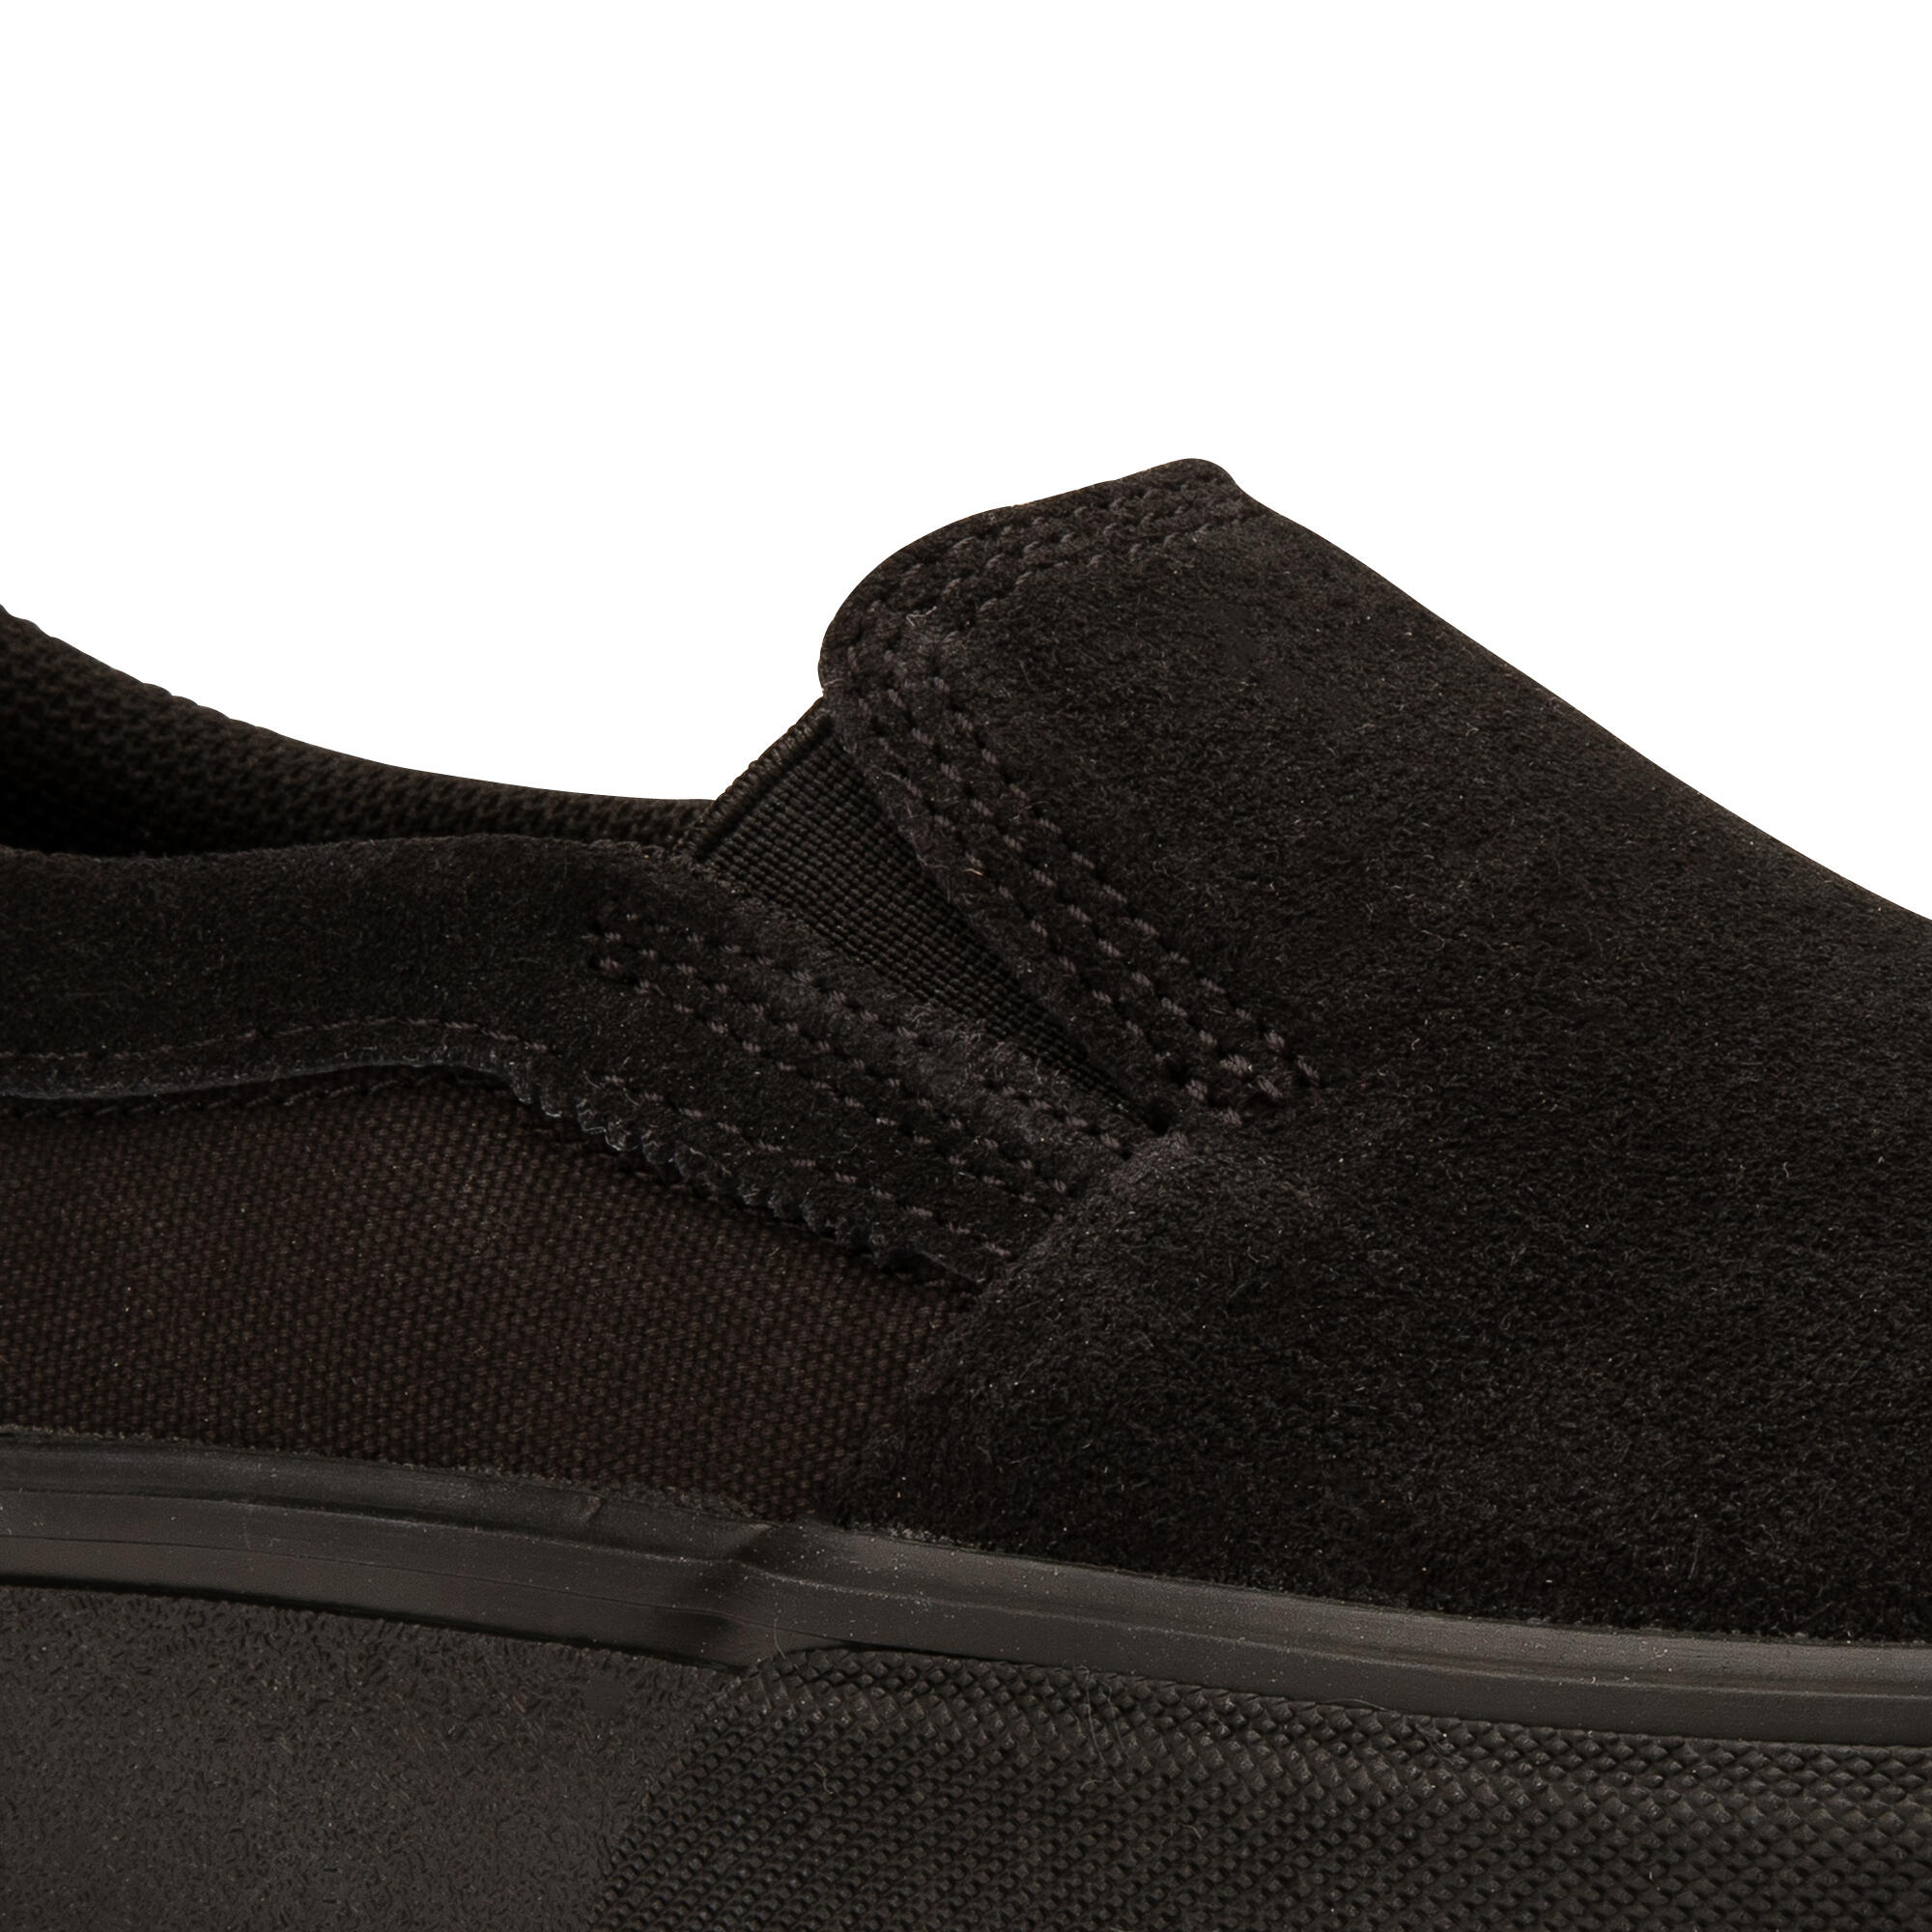 Adult Low-Top Slip-On Skate Shoes Without Laces Vulca 500 - Black 11/14